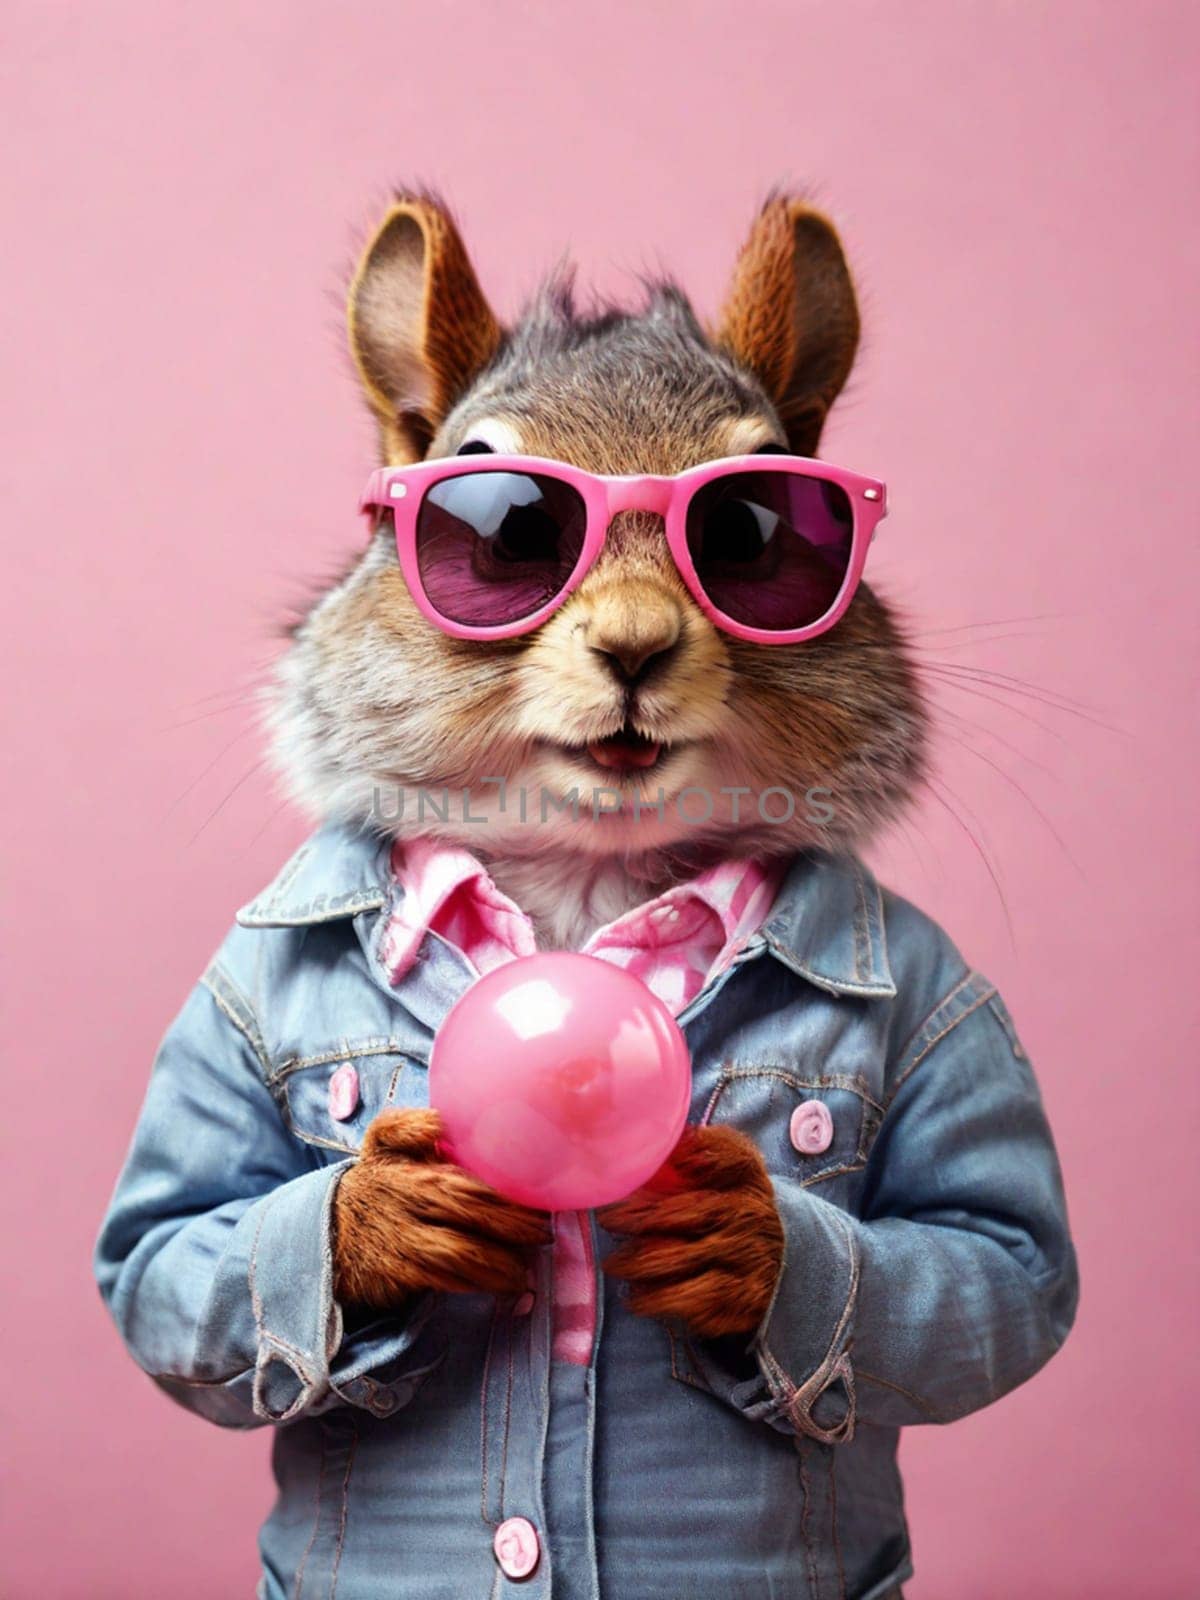 Squirrel man wearing a denim jacket and a pink shirt with pink glasses on a pink background by Ekaterina34